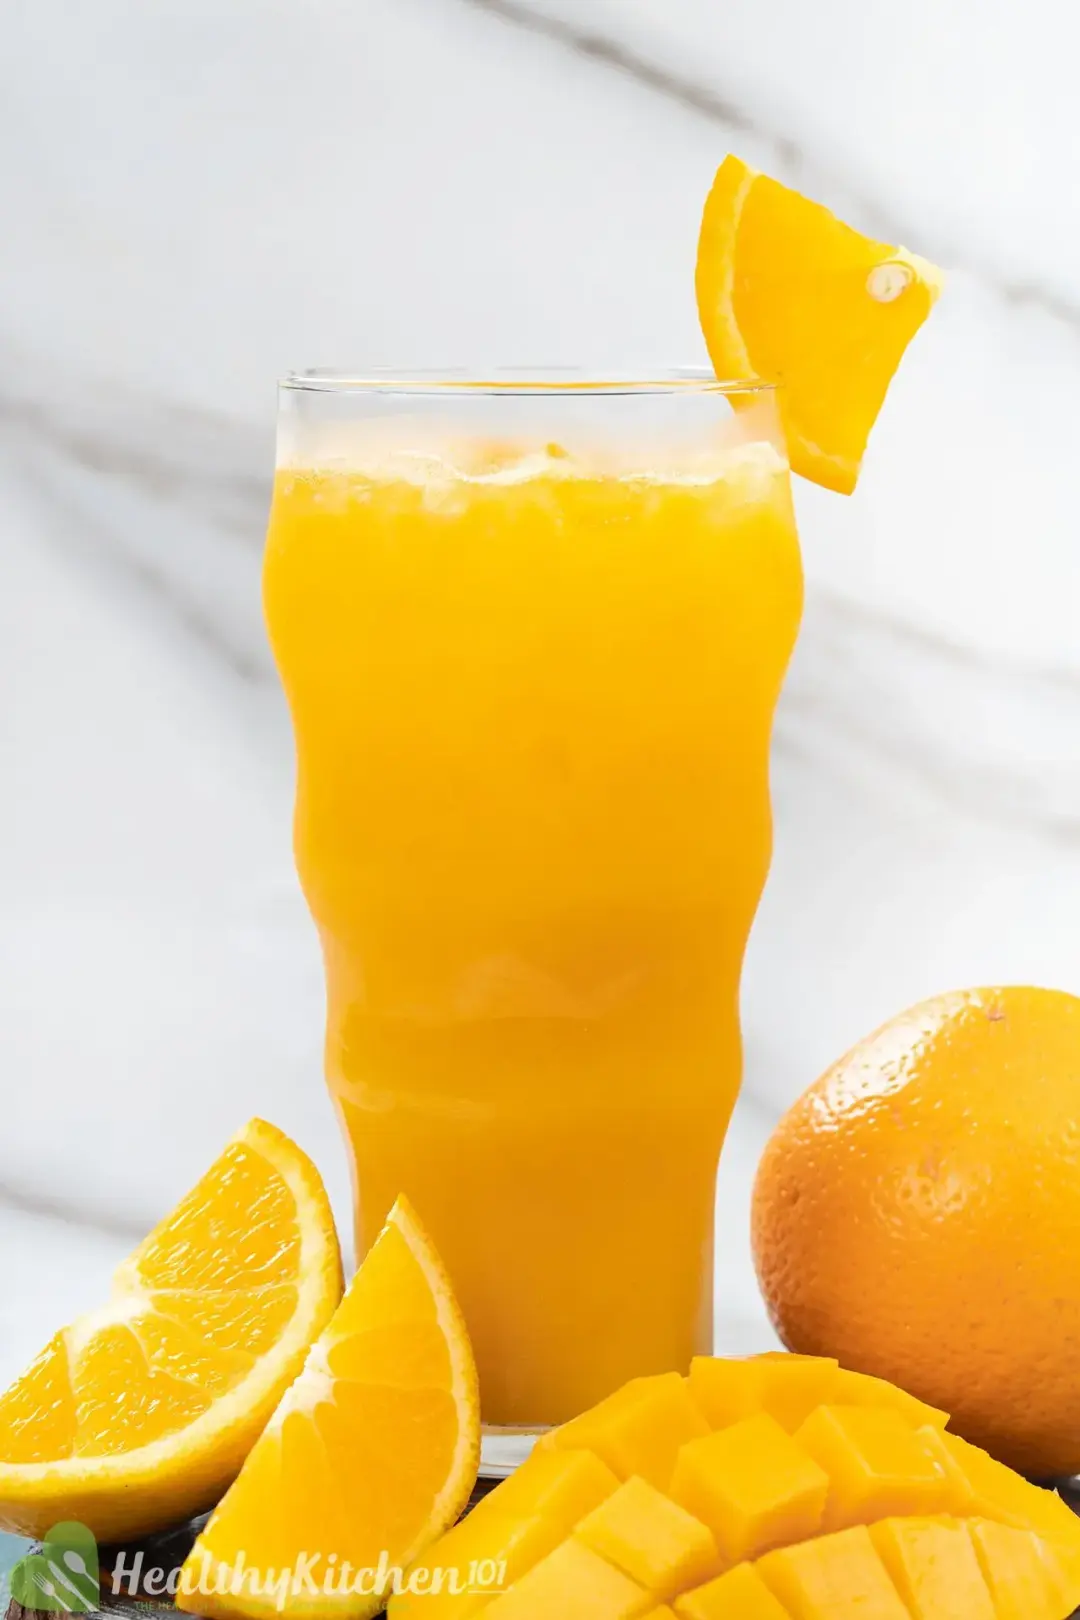 A tall glass of iced orange juice, next to some orange wedges, a whole orange, and a mango piece